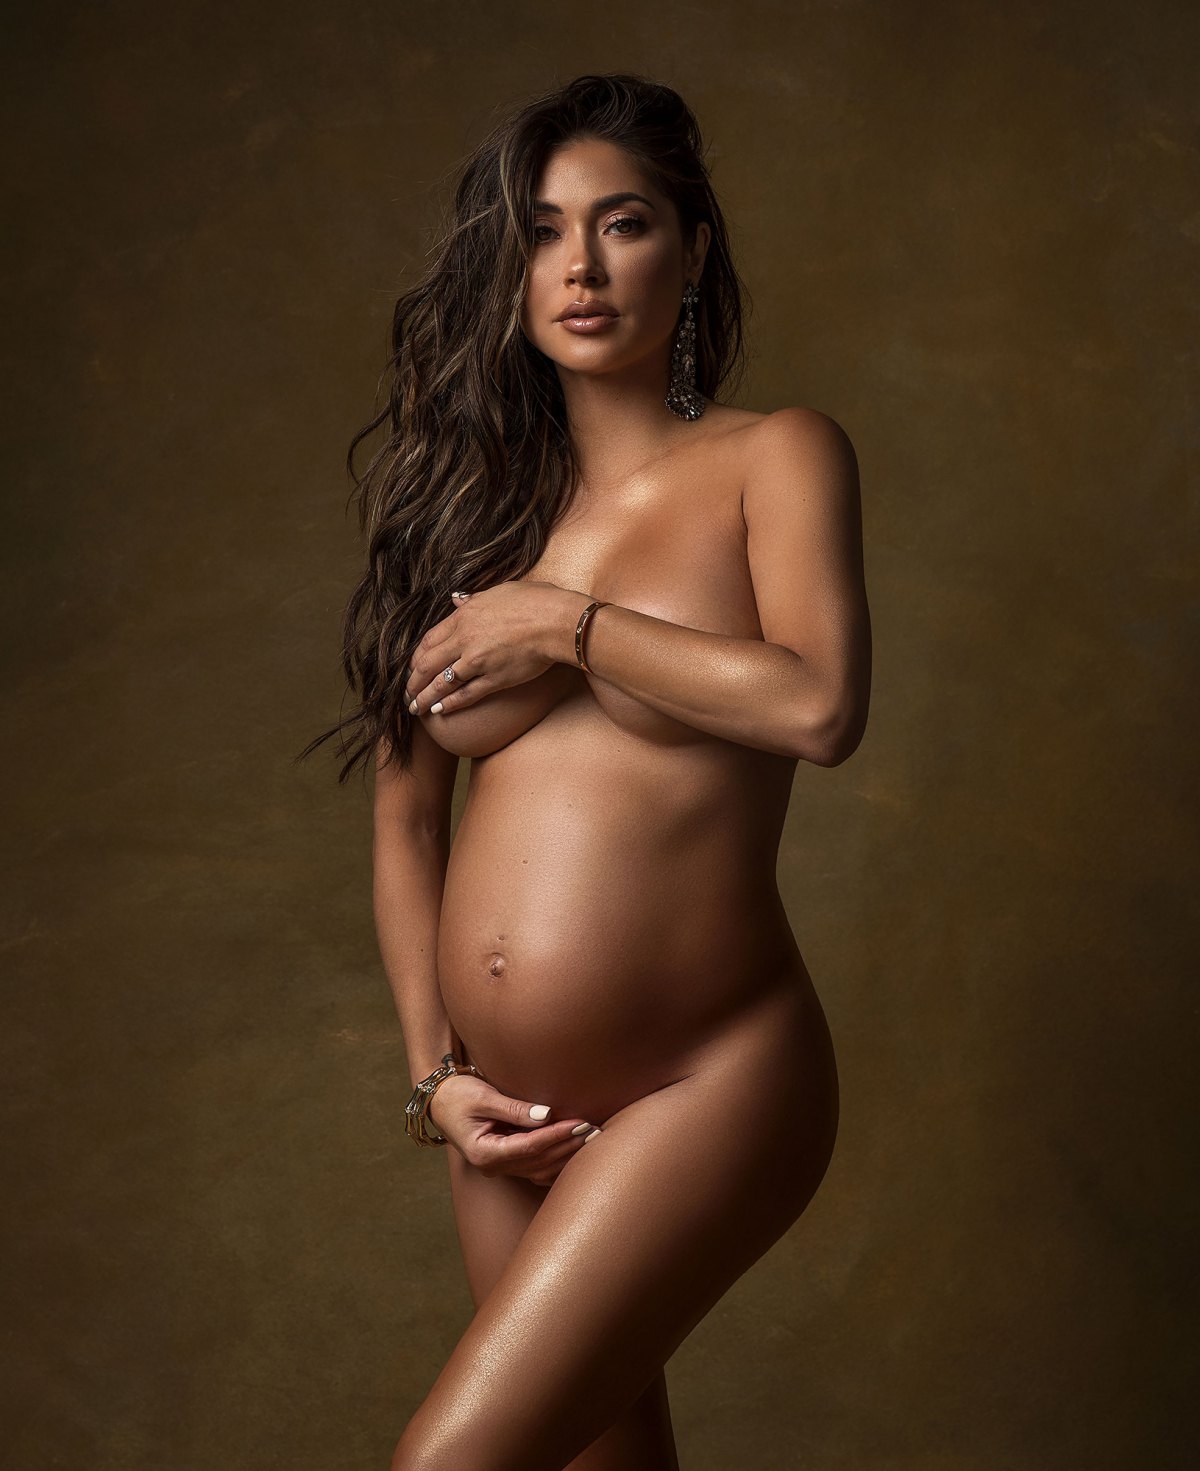 Lovely Pregnant Nudes - Celebrities Posing Nude While Pregnant: Maternity Pics